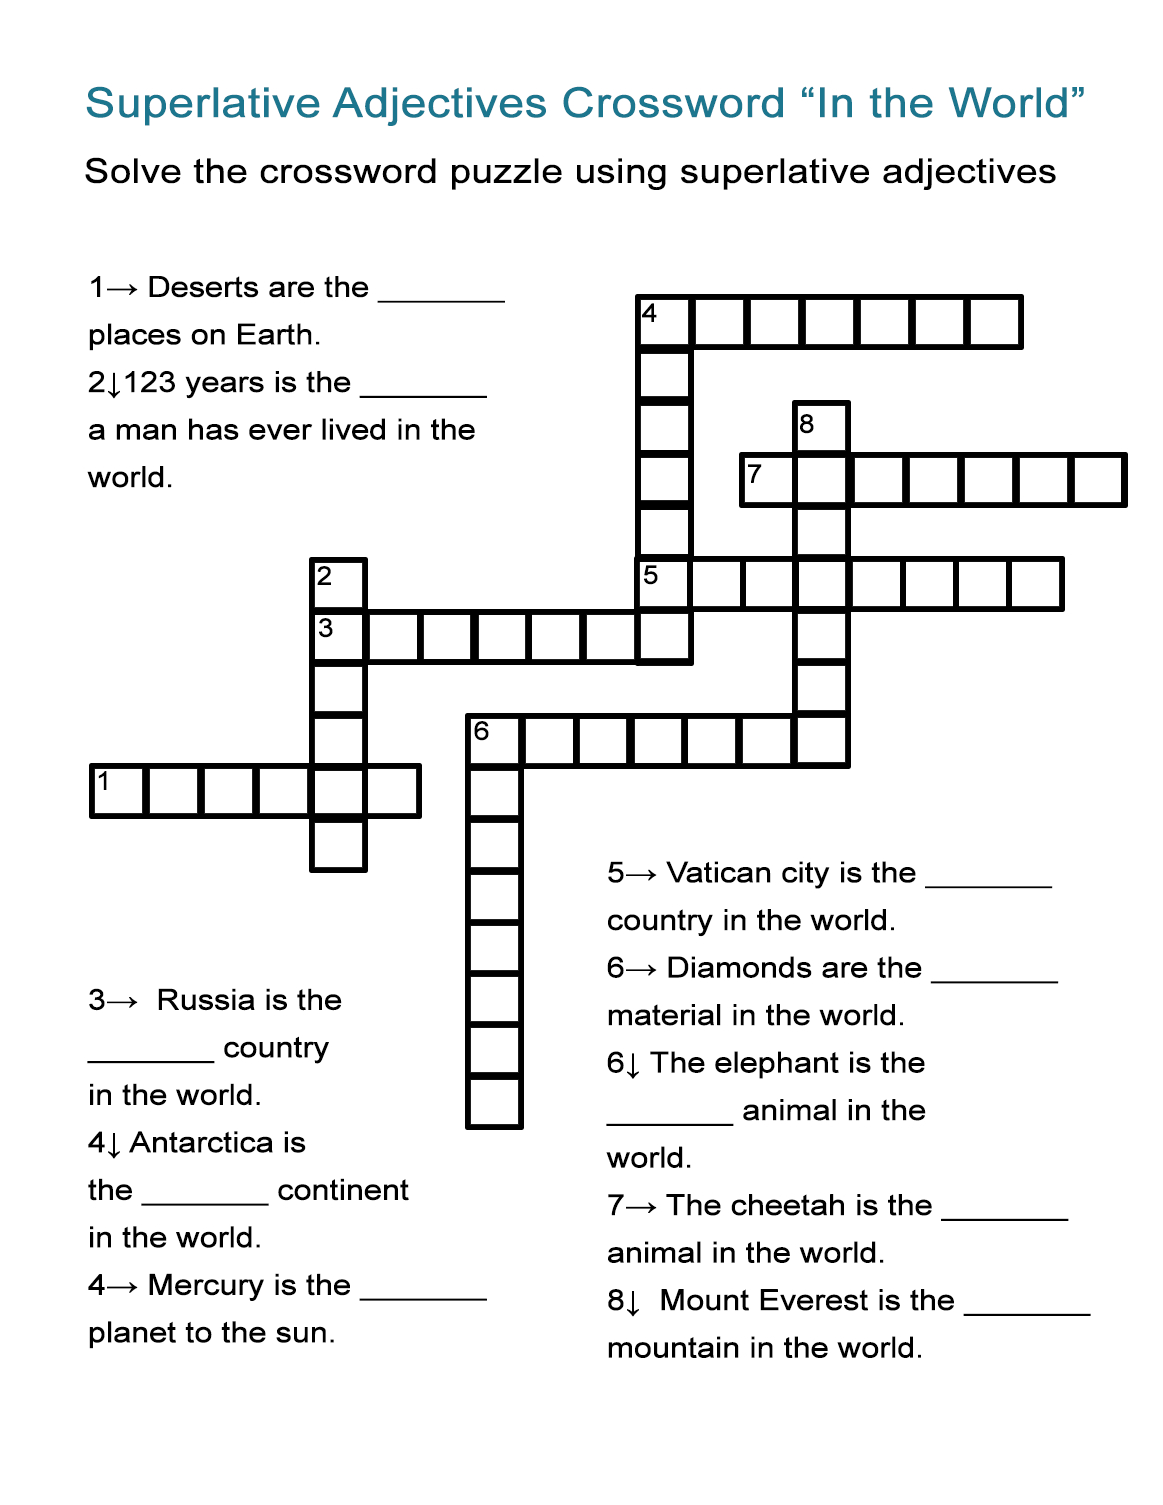 Superlative Adjectives Worksheet  "in The World" Crossword Puzzle